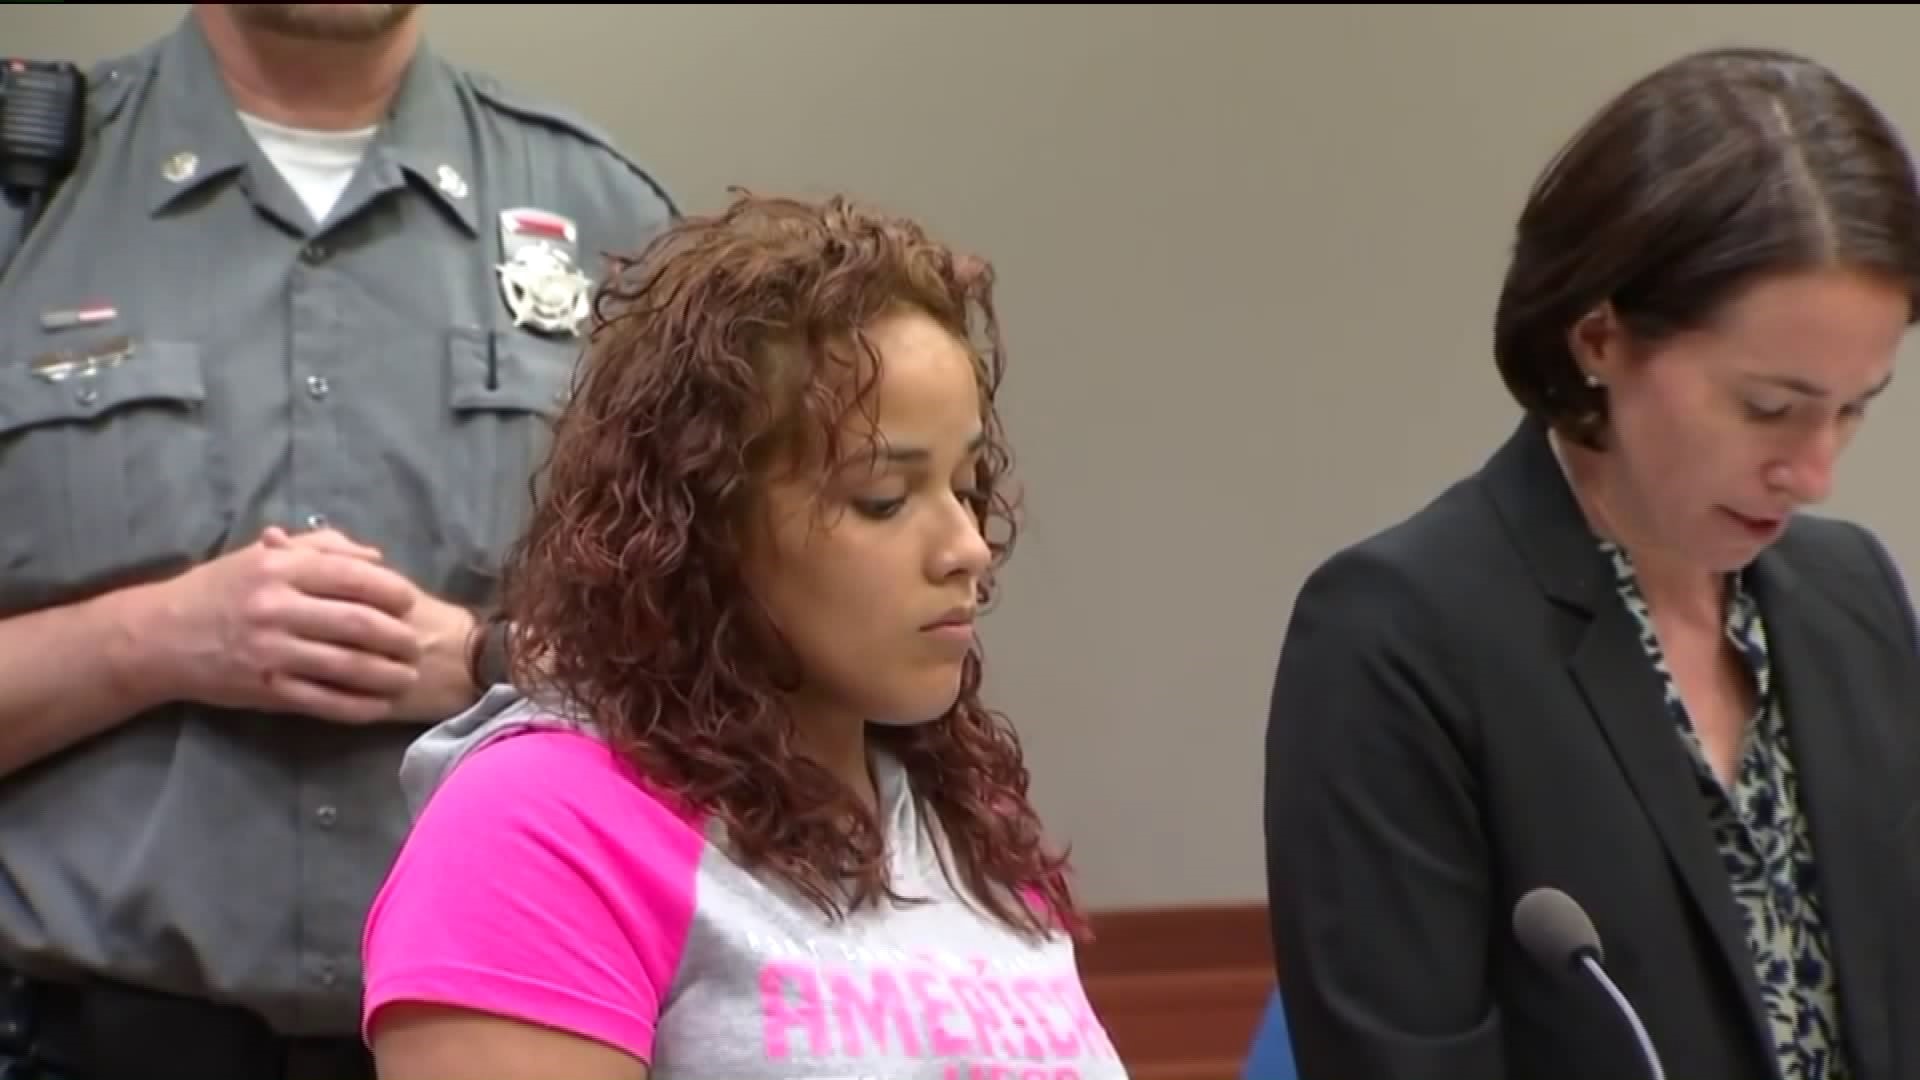 Mother arraigned on DUI charges after crash that seriously injured teen